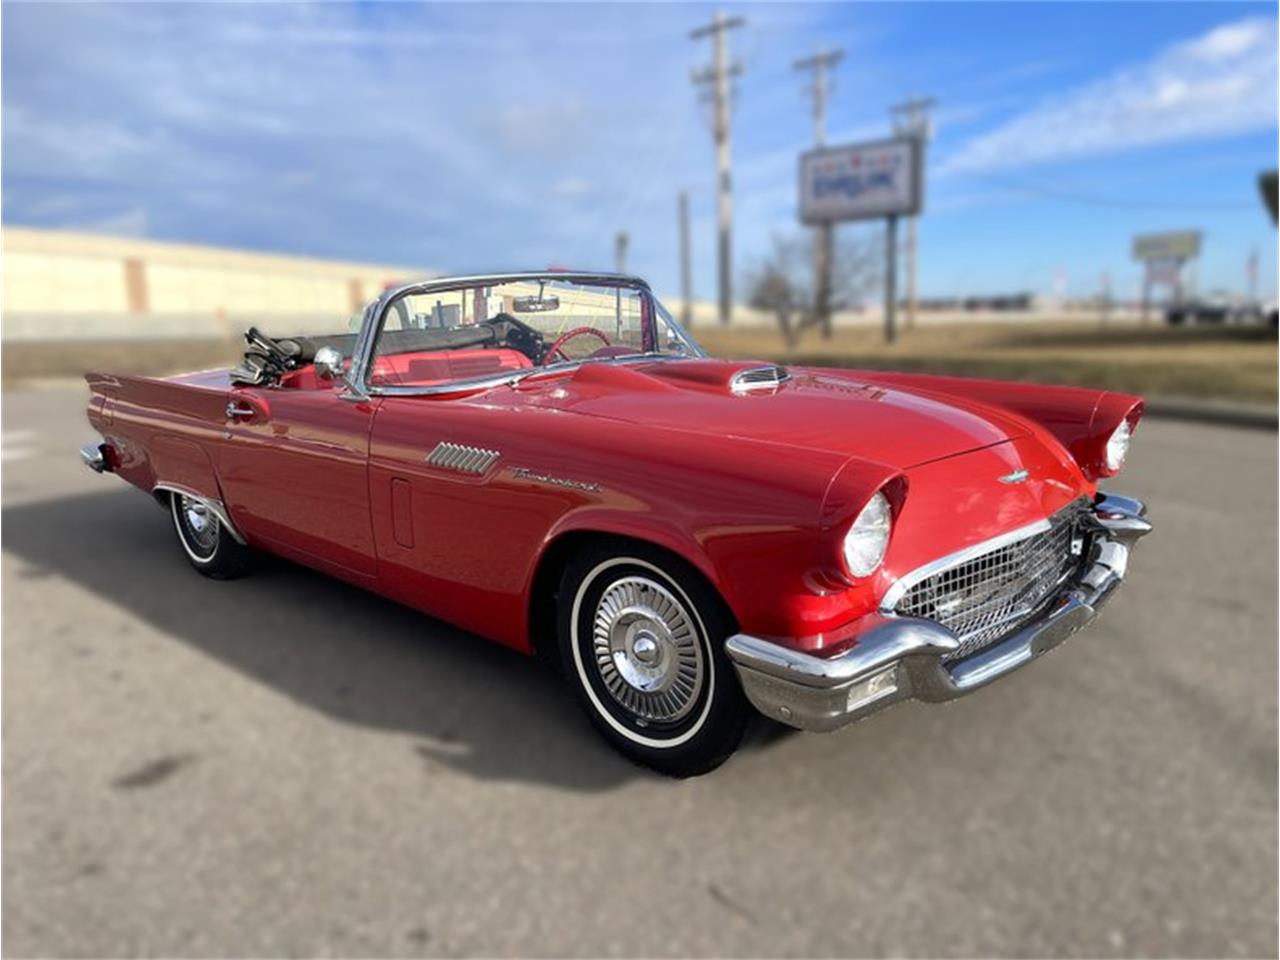 For Sale: 1957 Ford Thunderbird in Ramsey, Minnesota for sale in Anoka, MN